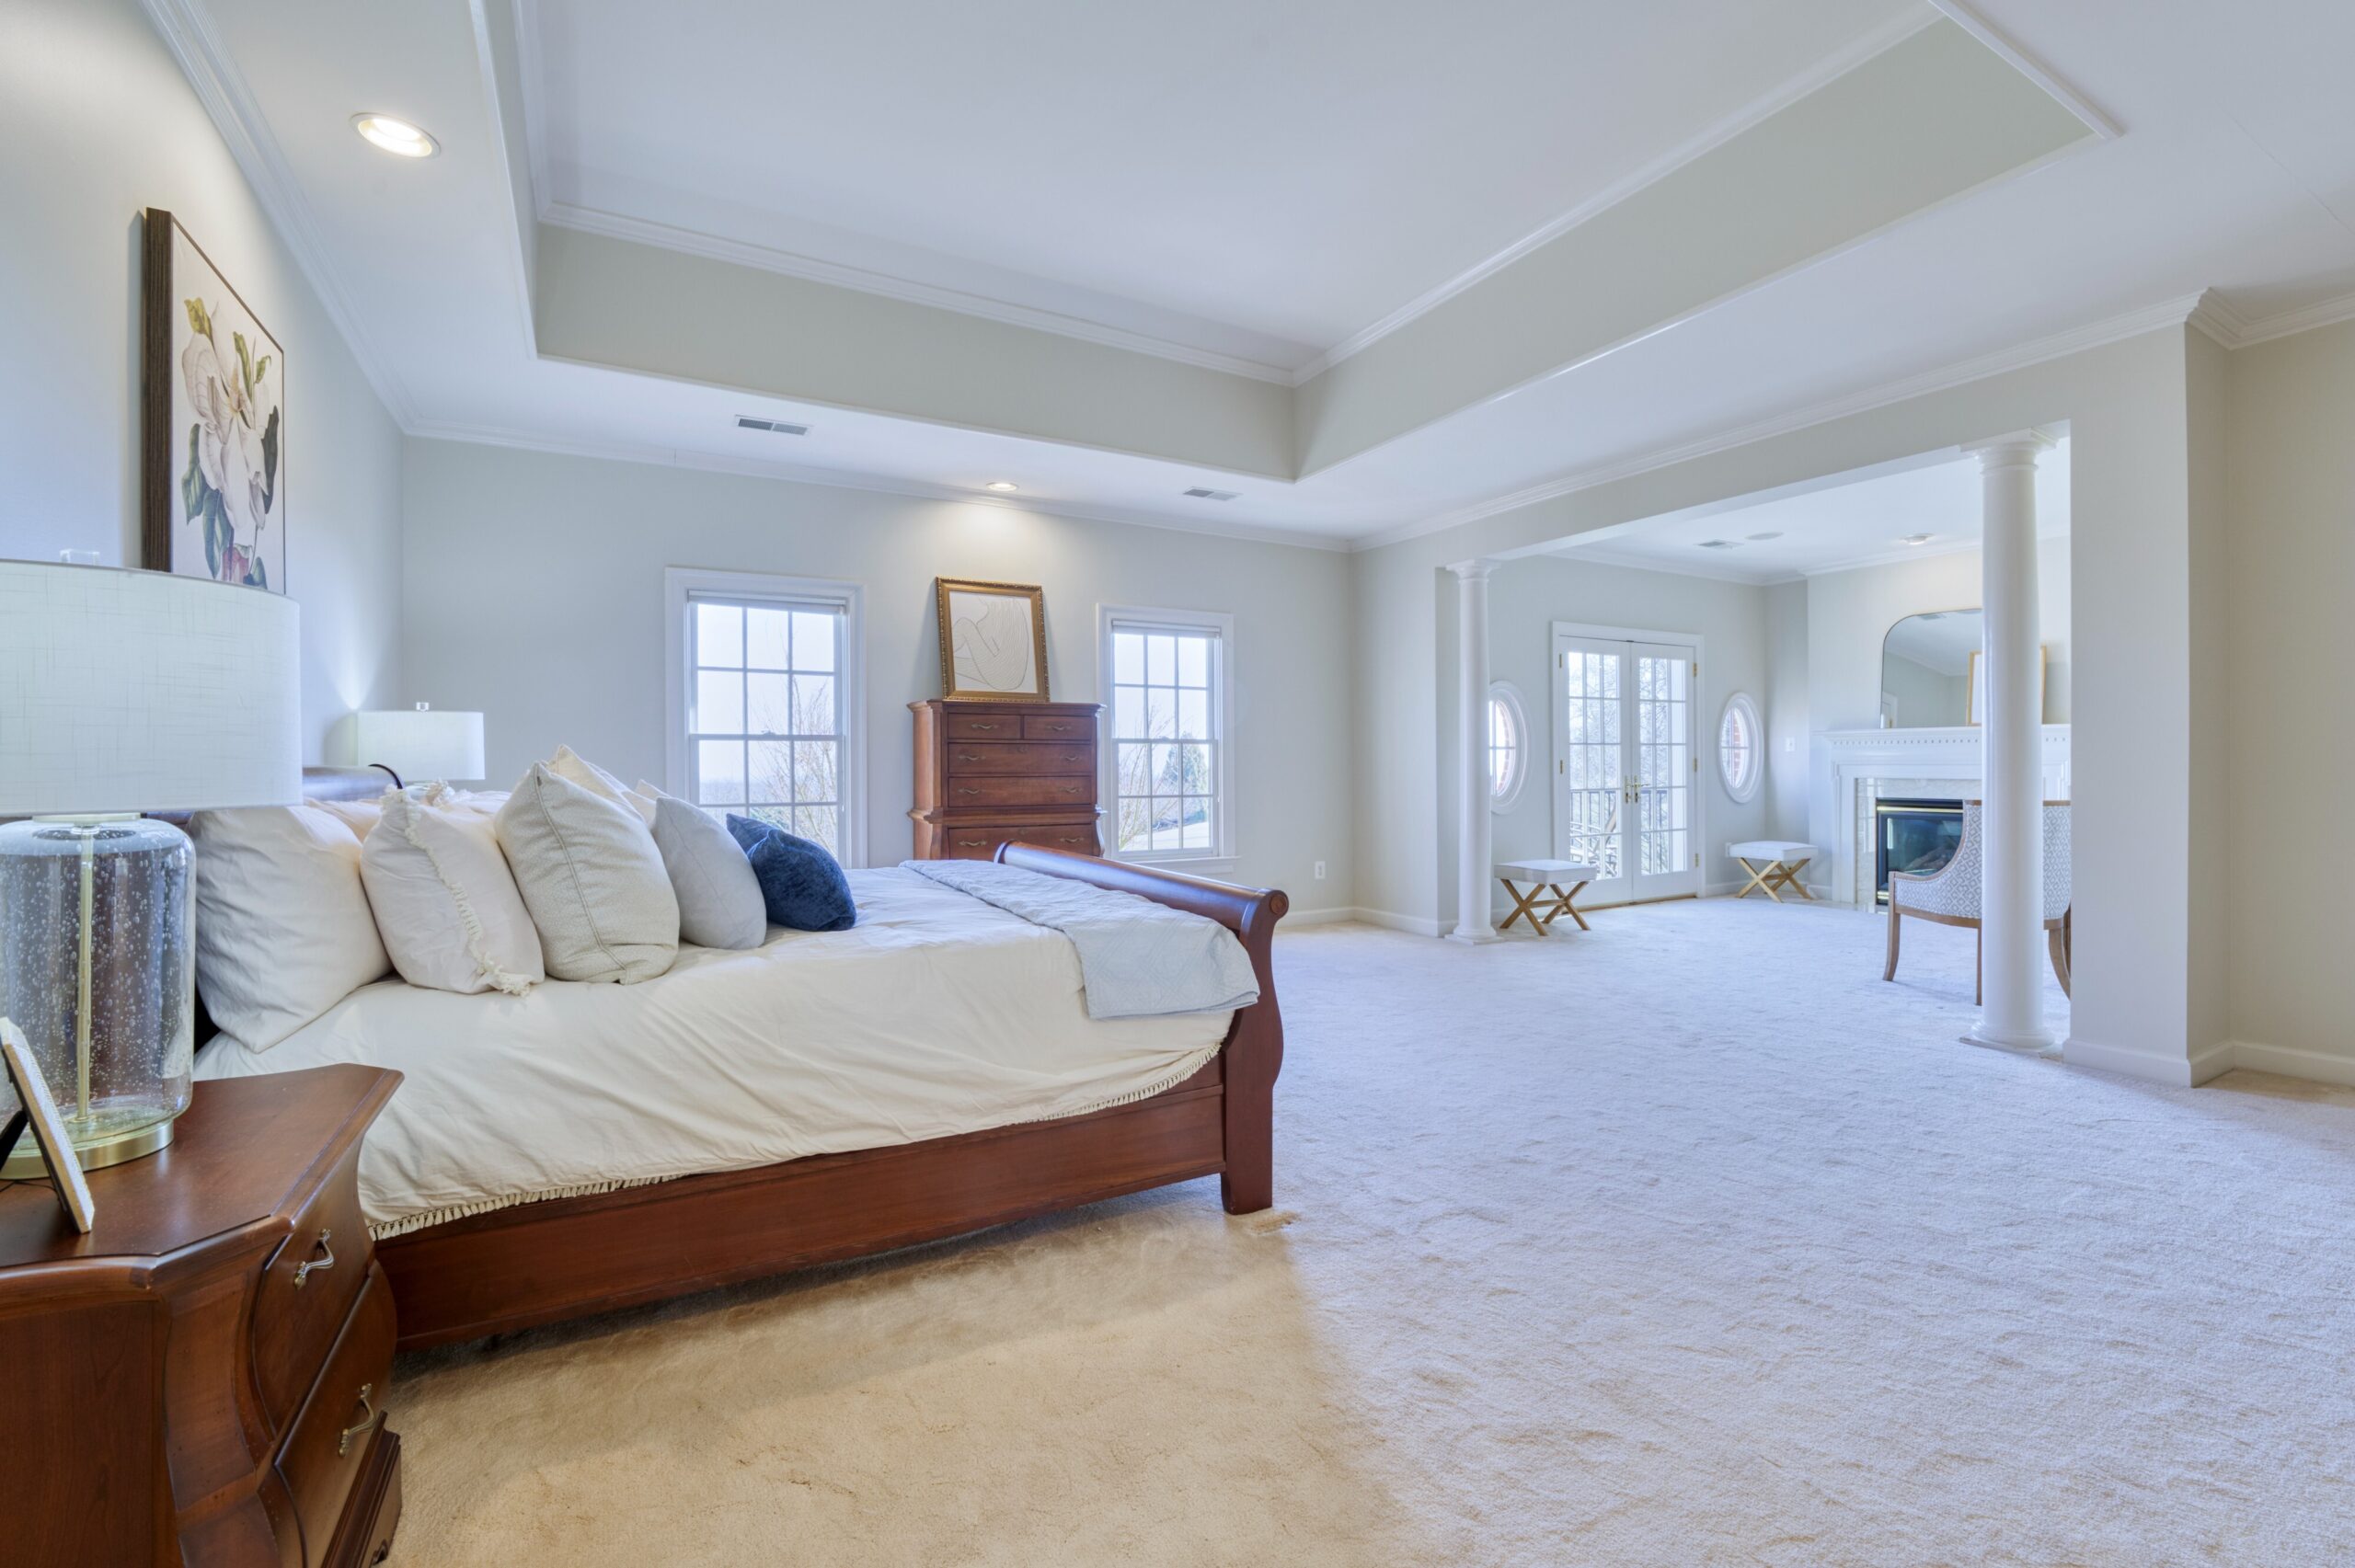 Professional interior photo of 17087 Bold Venture Drive, Leesburg - showing the primary suite with deep tray ceiling and view of the private sitting area with fireplace